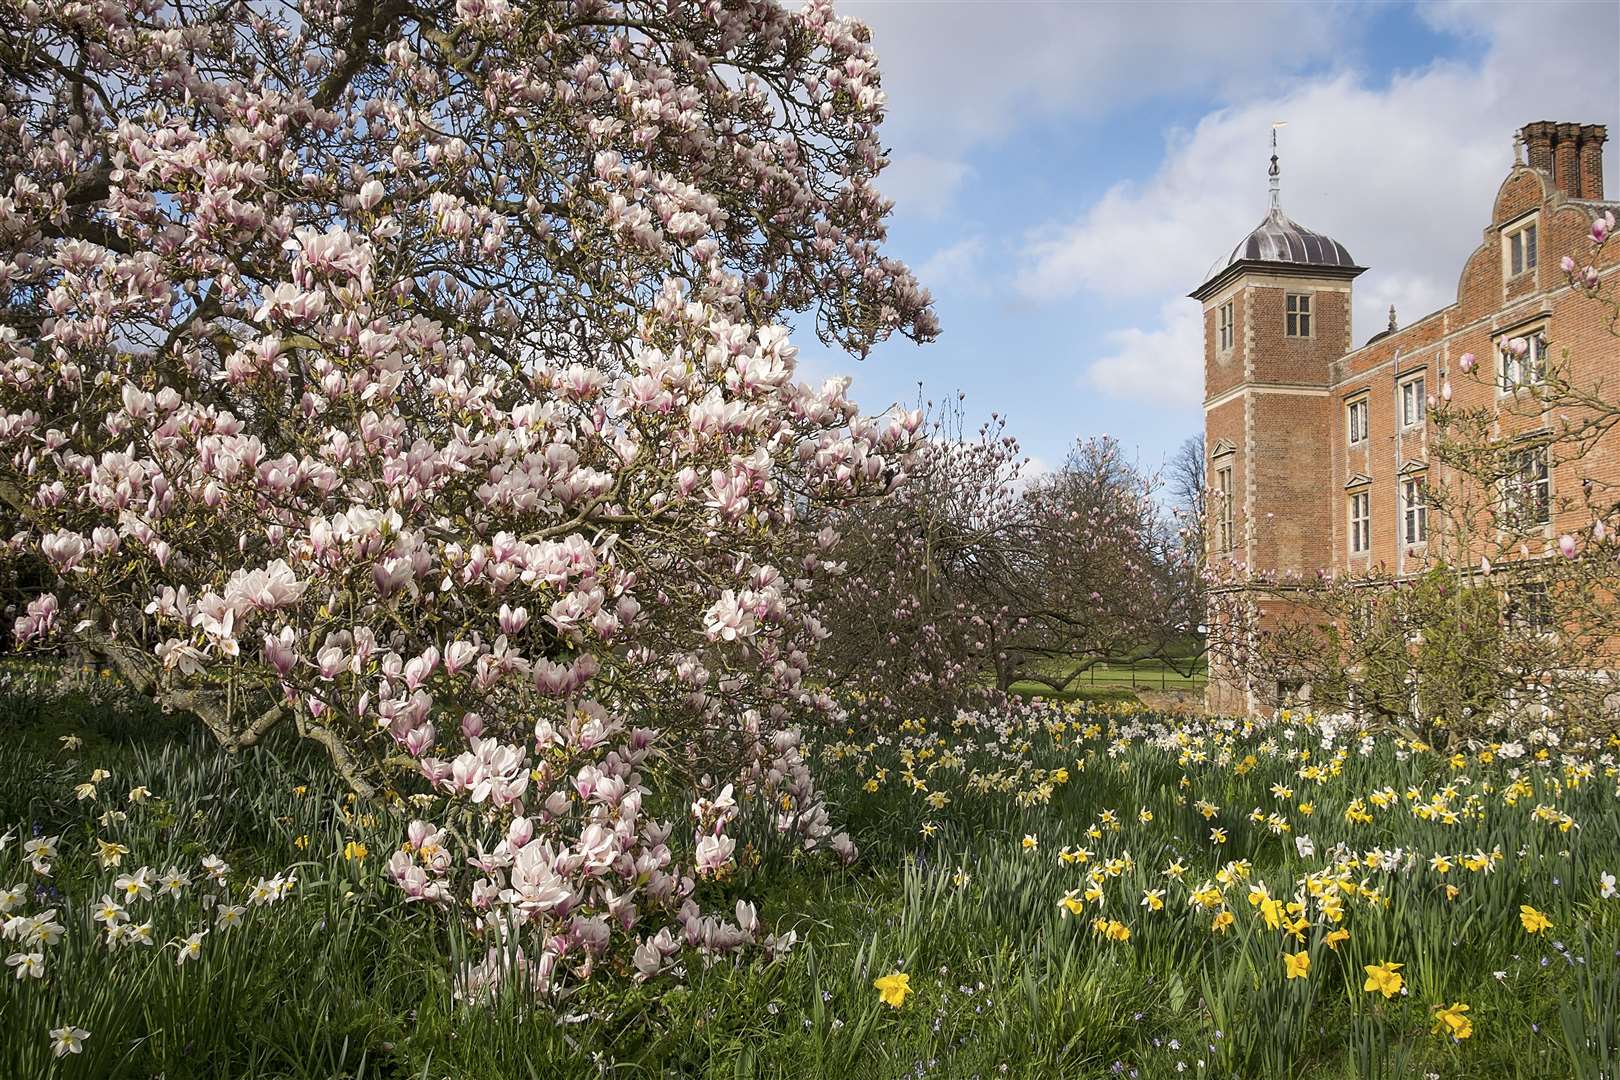 Daffodils and grape hyacinths growing under a cherry tree in the garden of Blickling Estate, Norfolk (Justin Minns/National Trust/PA)